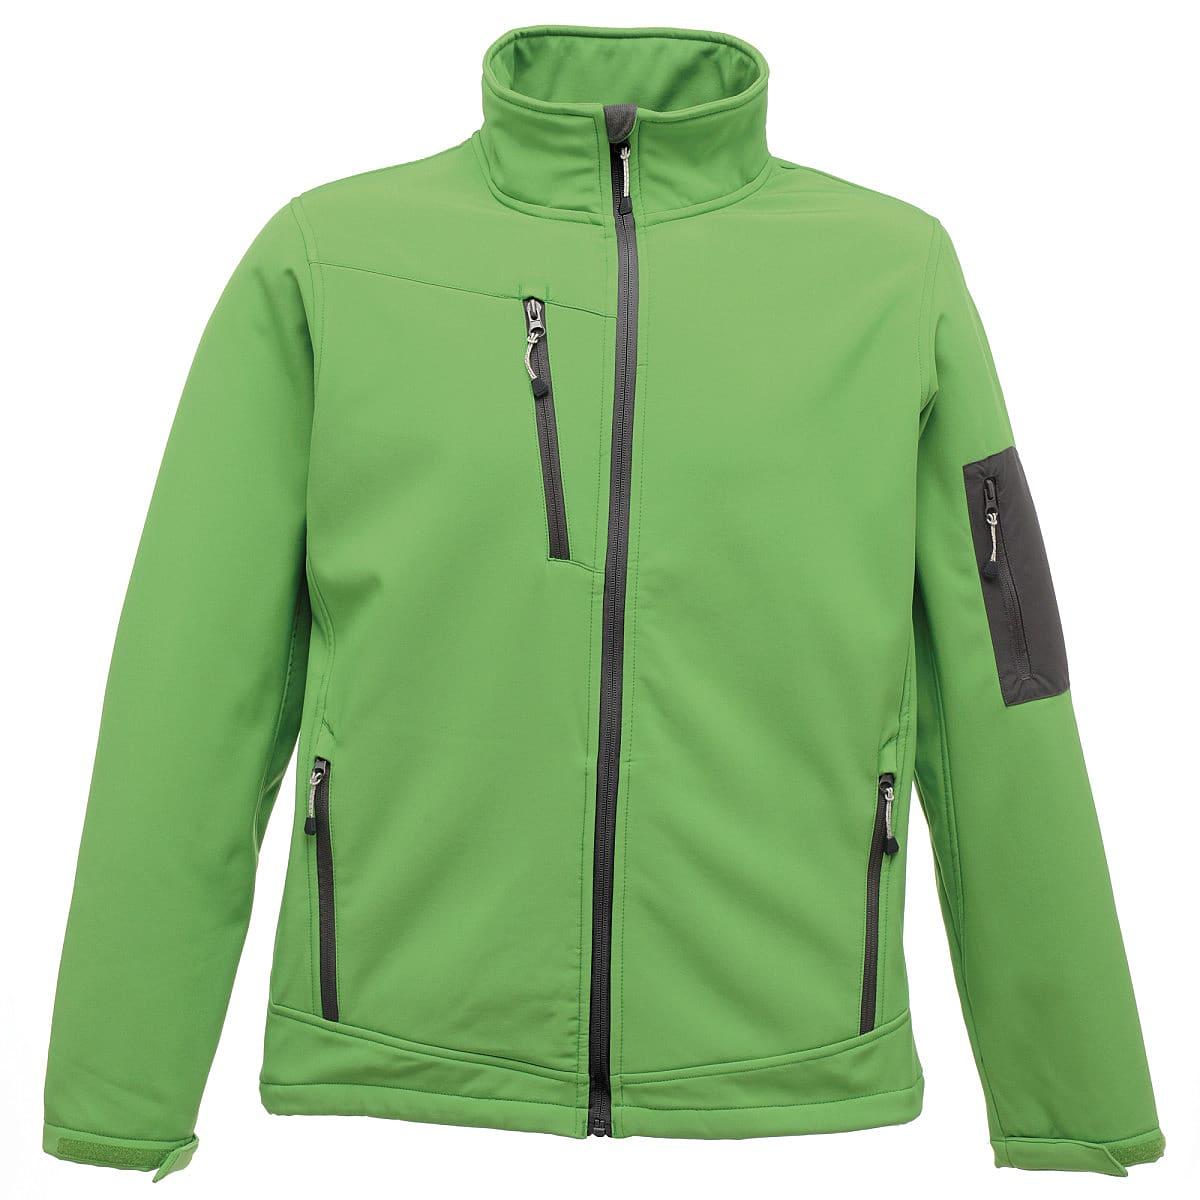 Regatta Arcola Softshell Jacket in Extreme Green / Seal Grey (Product Code: TRA674)